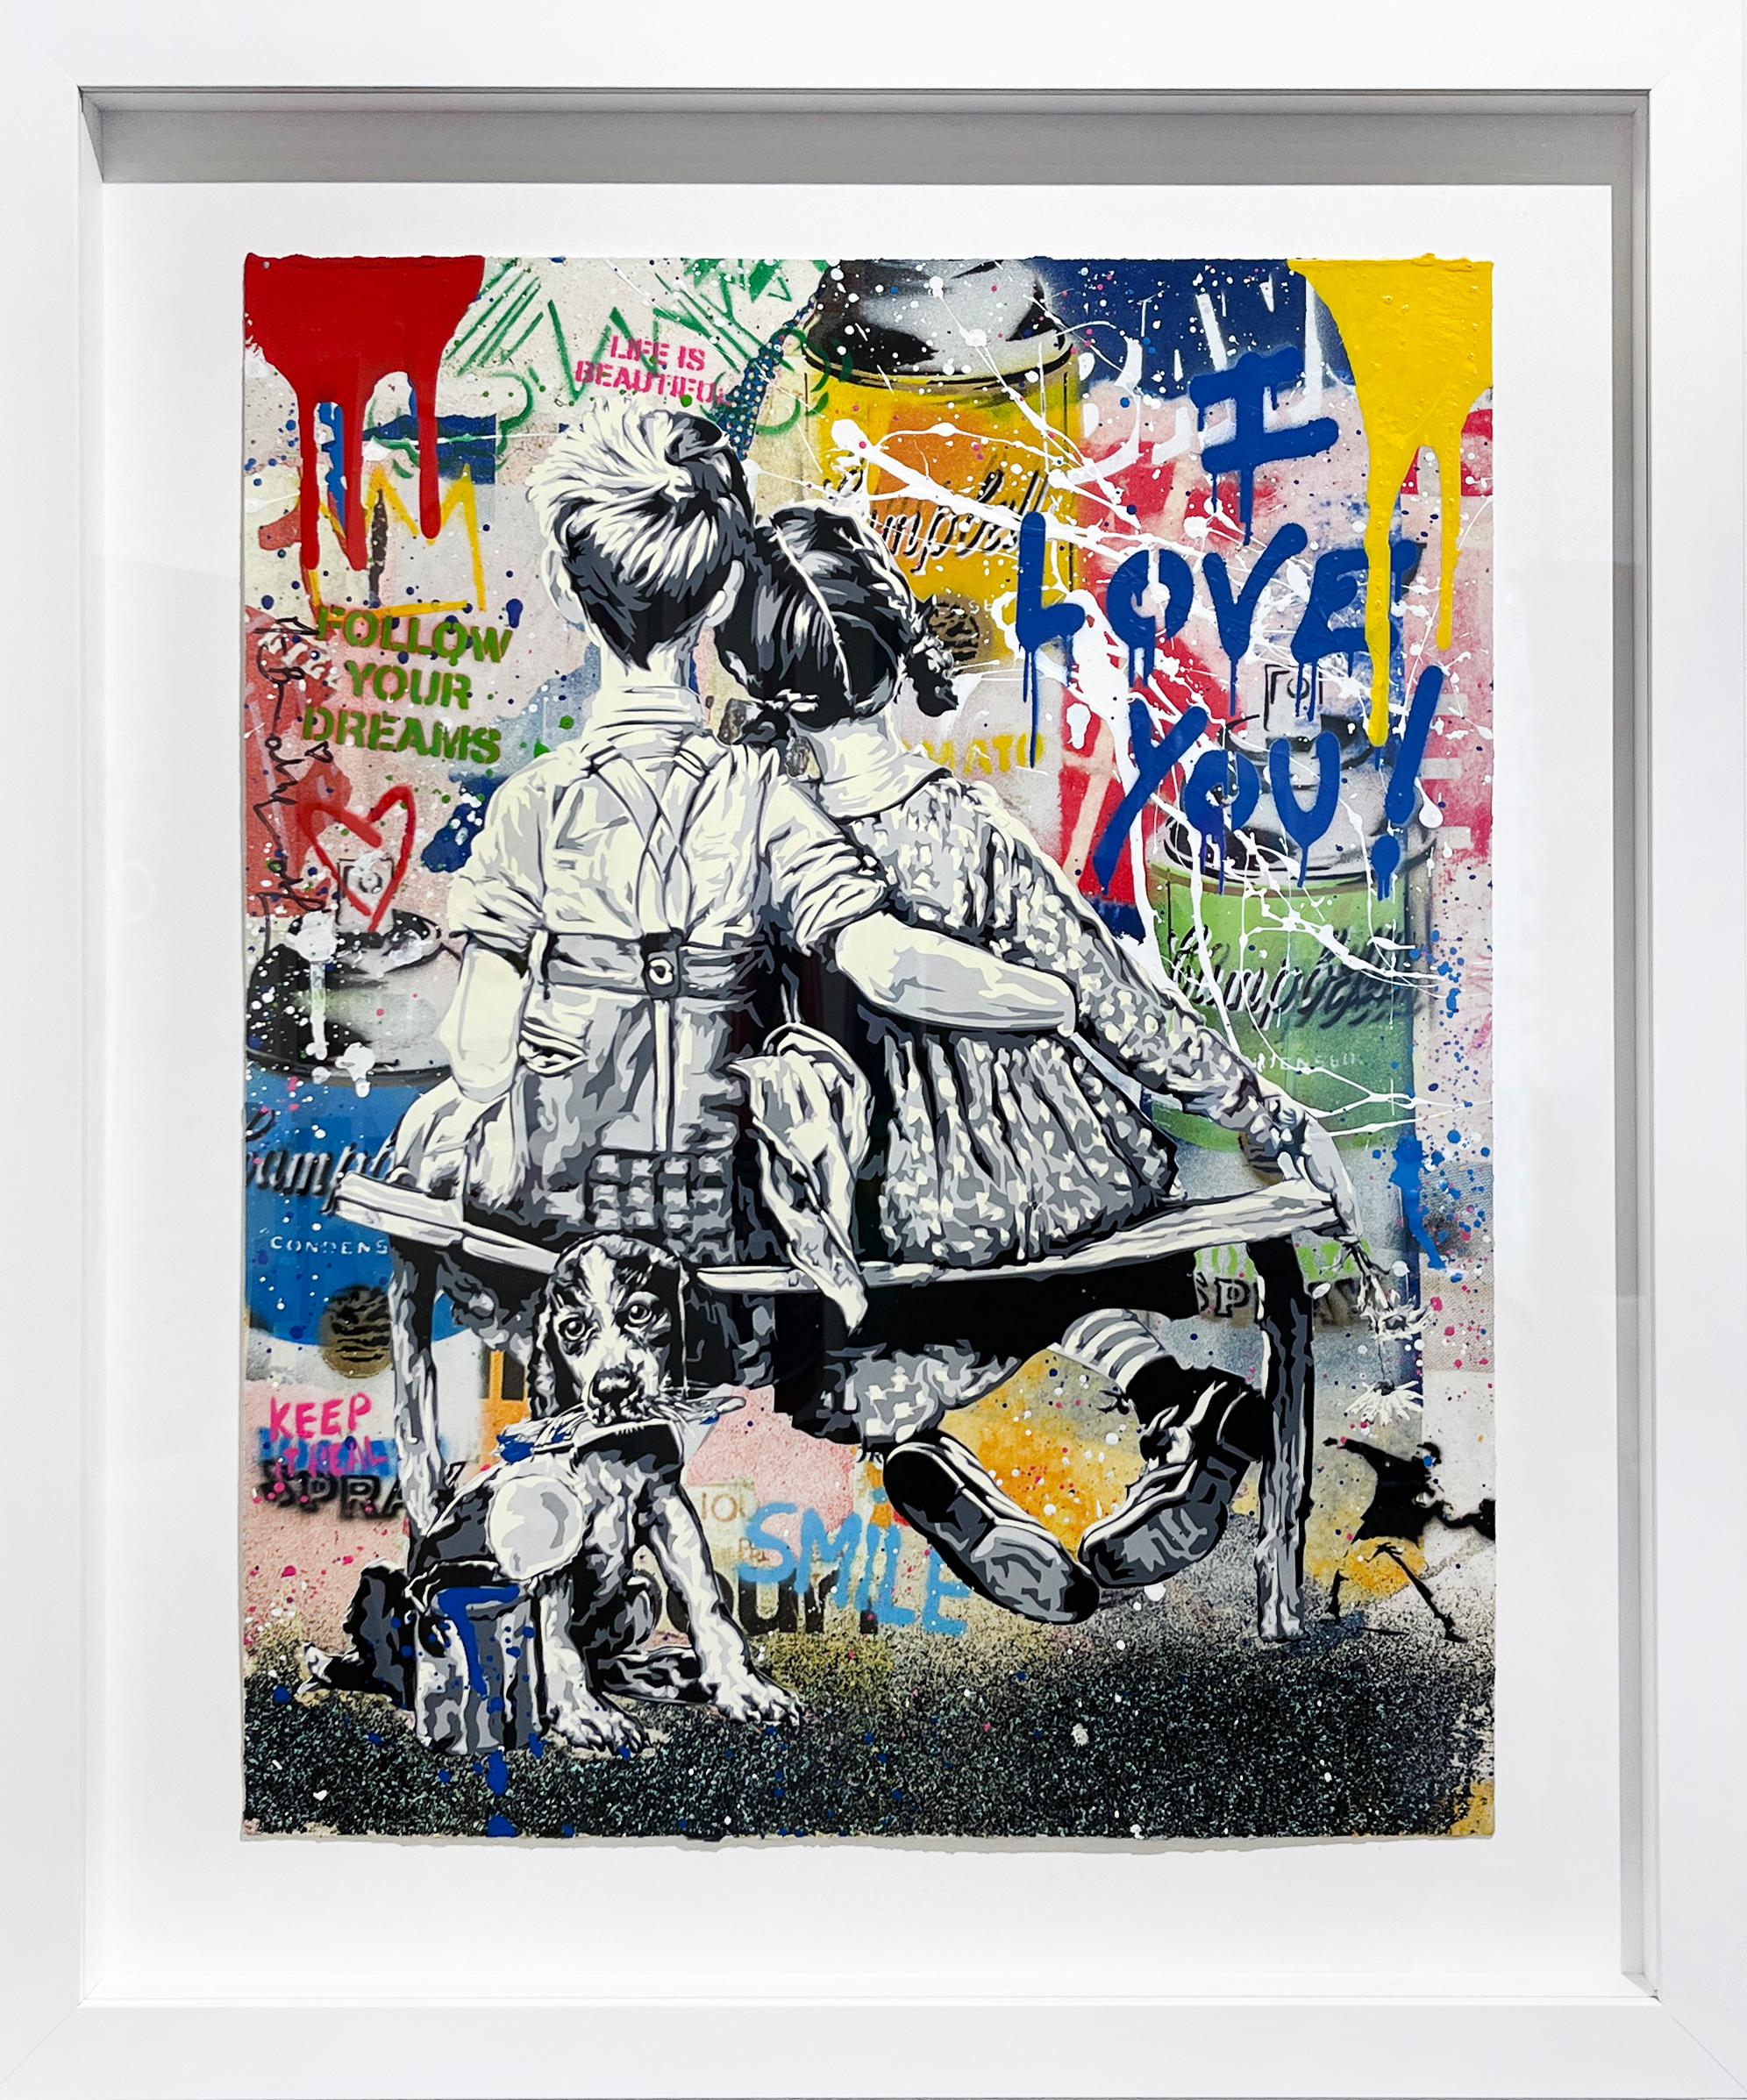 Work Well Together  - Mixed Media Art by Mr. Brainwash